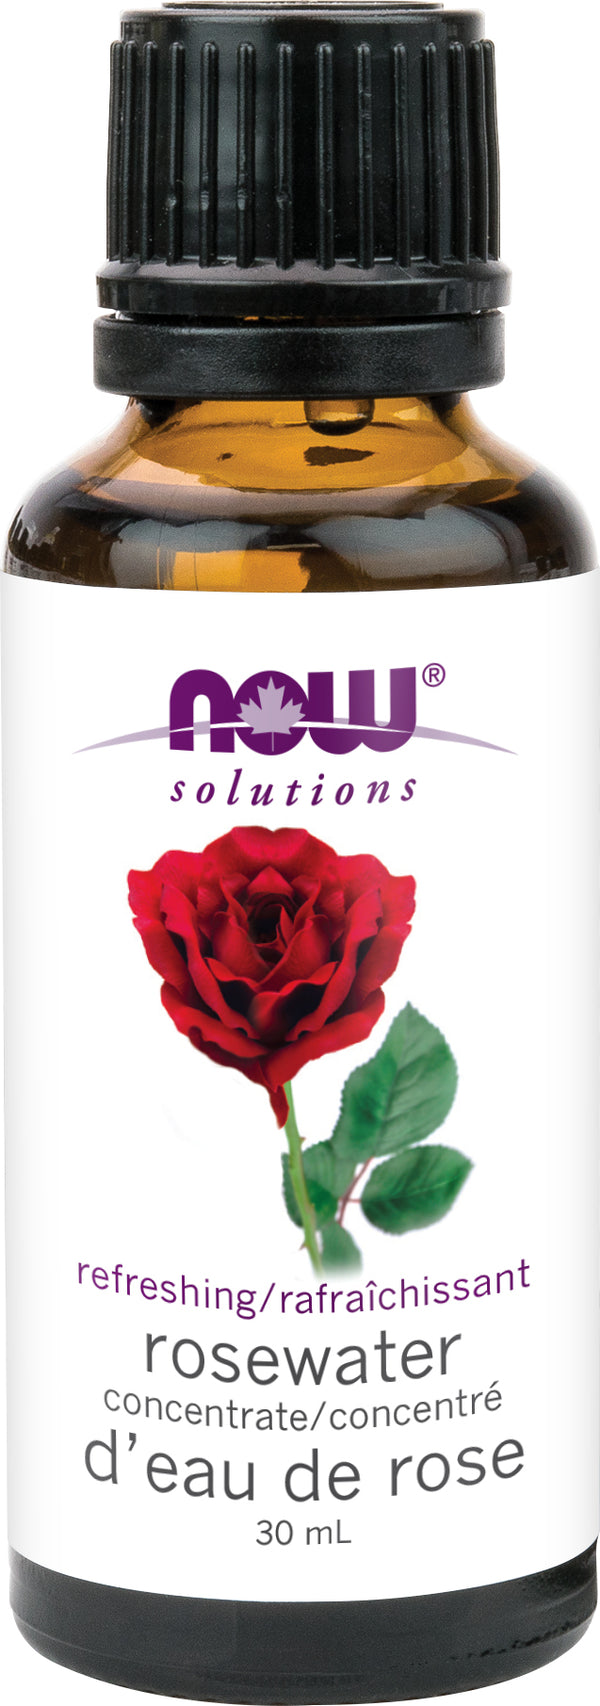 NOW Solutions Rosewater Concentrate (30mL)